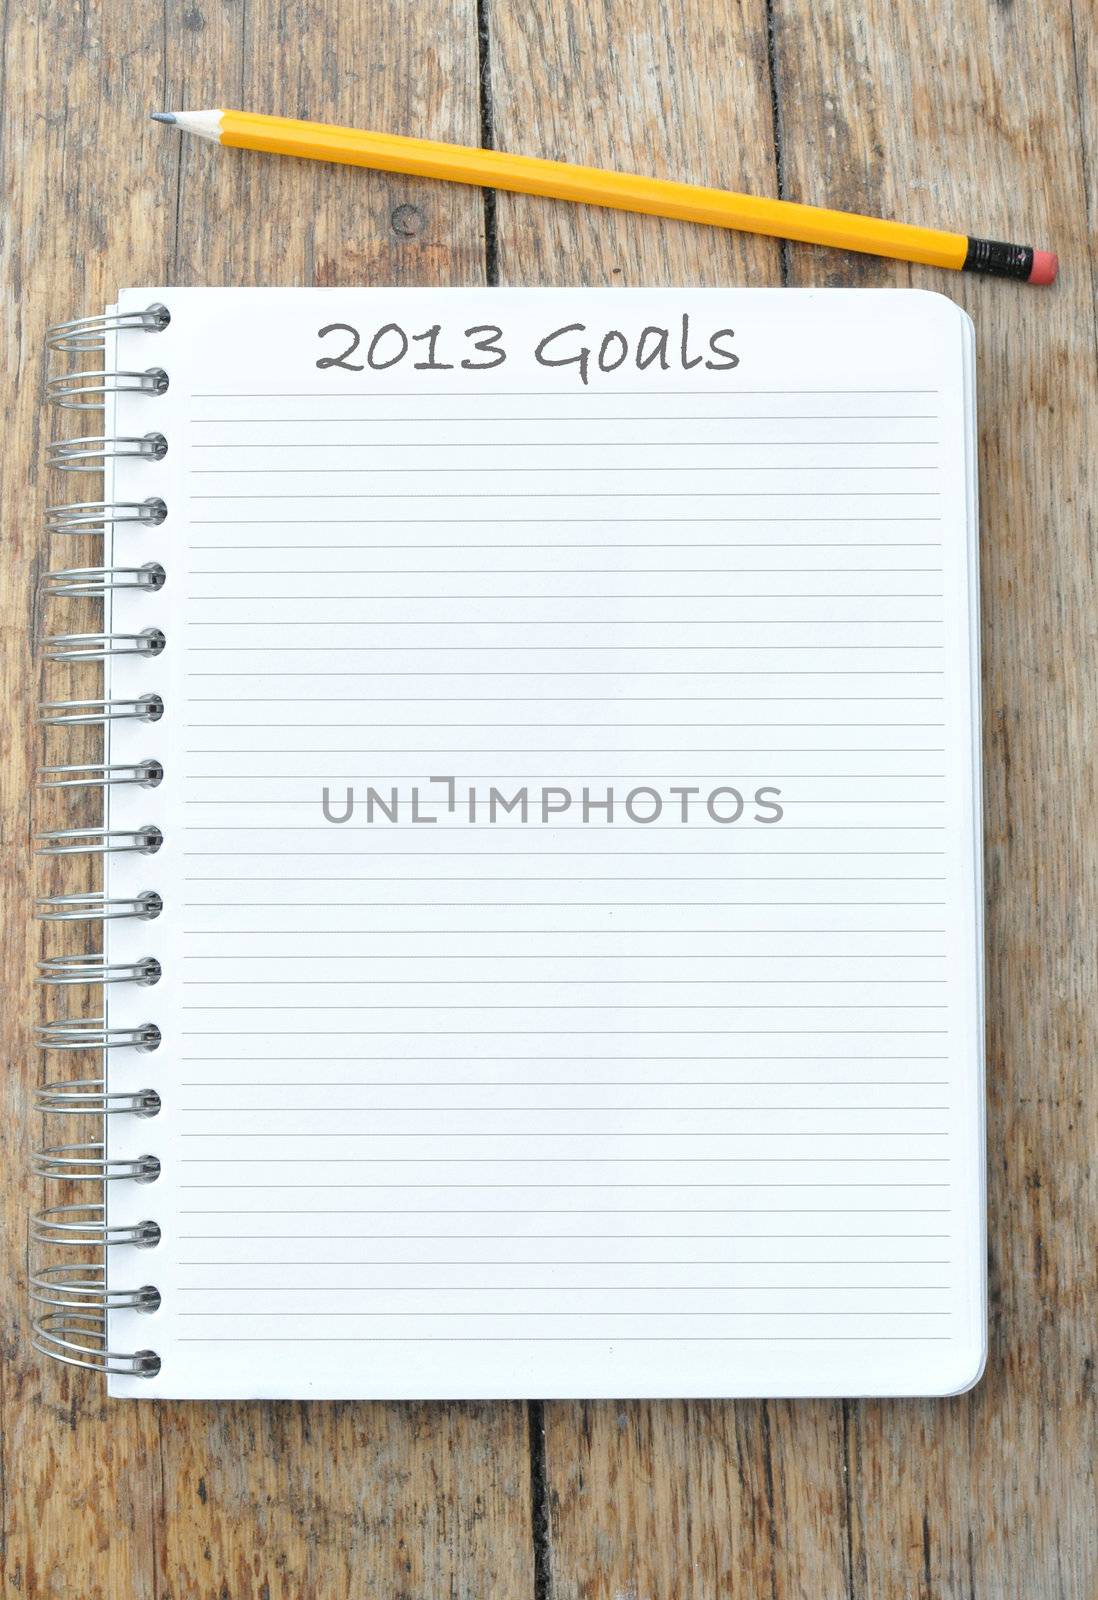 Resolutions and objectives for the new year 